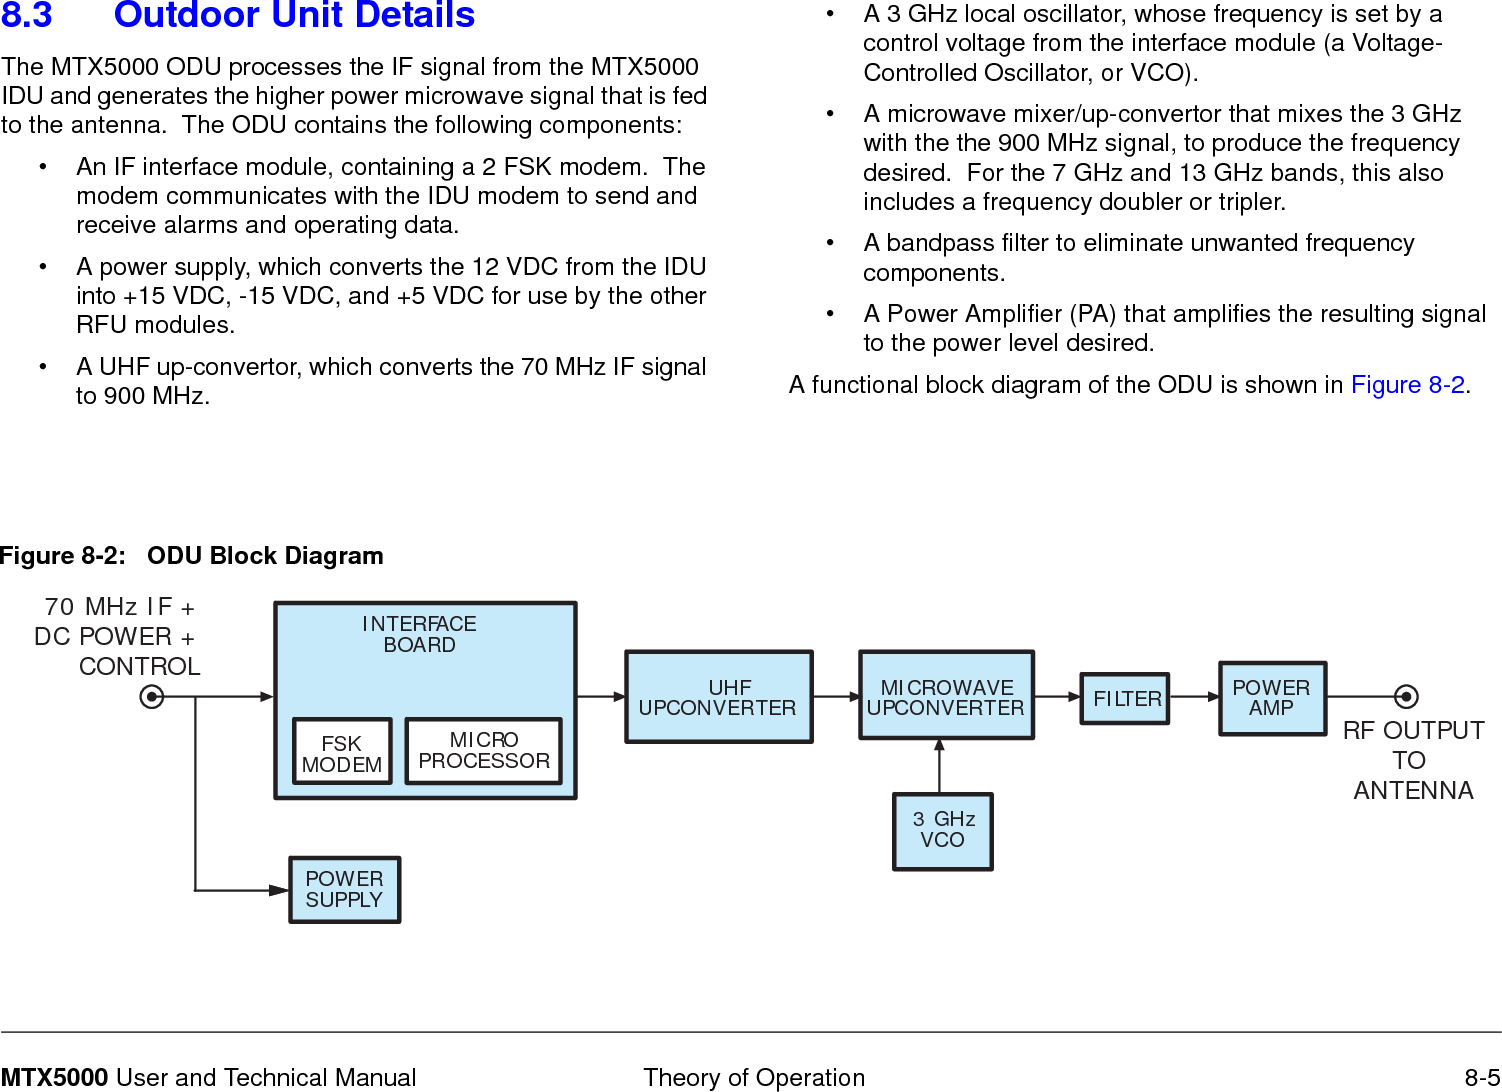  Theory of Operation 8-6MTX5000 User and Technical Manual